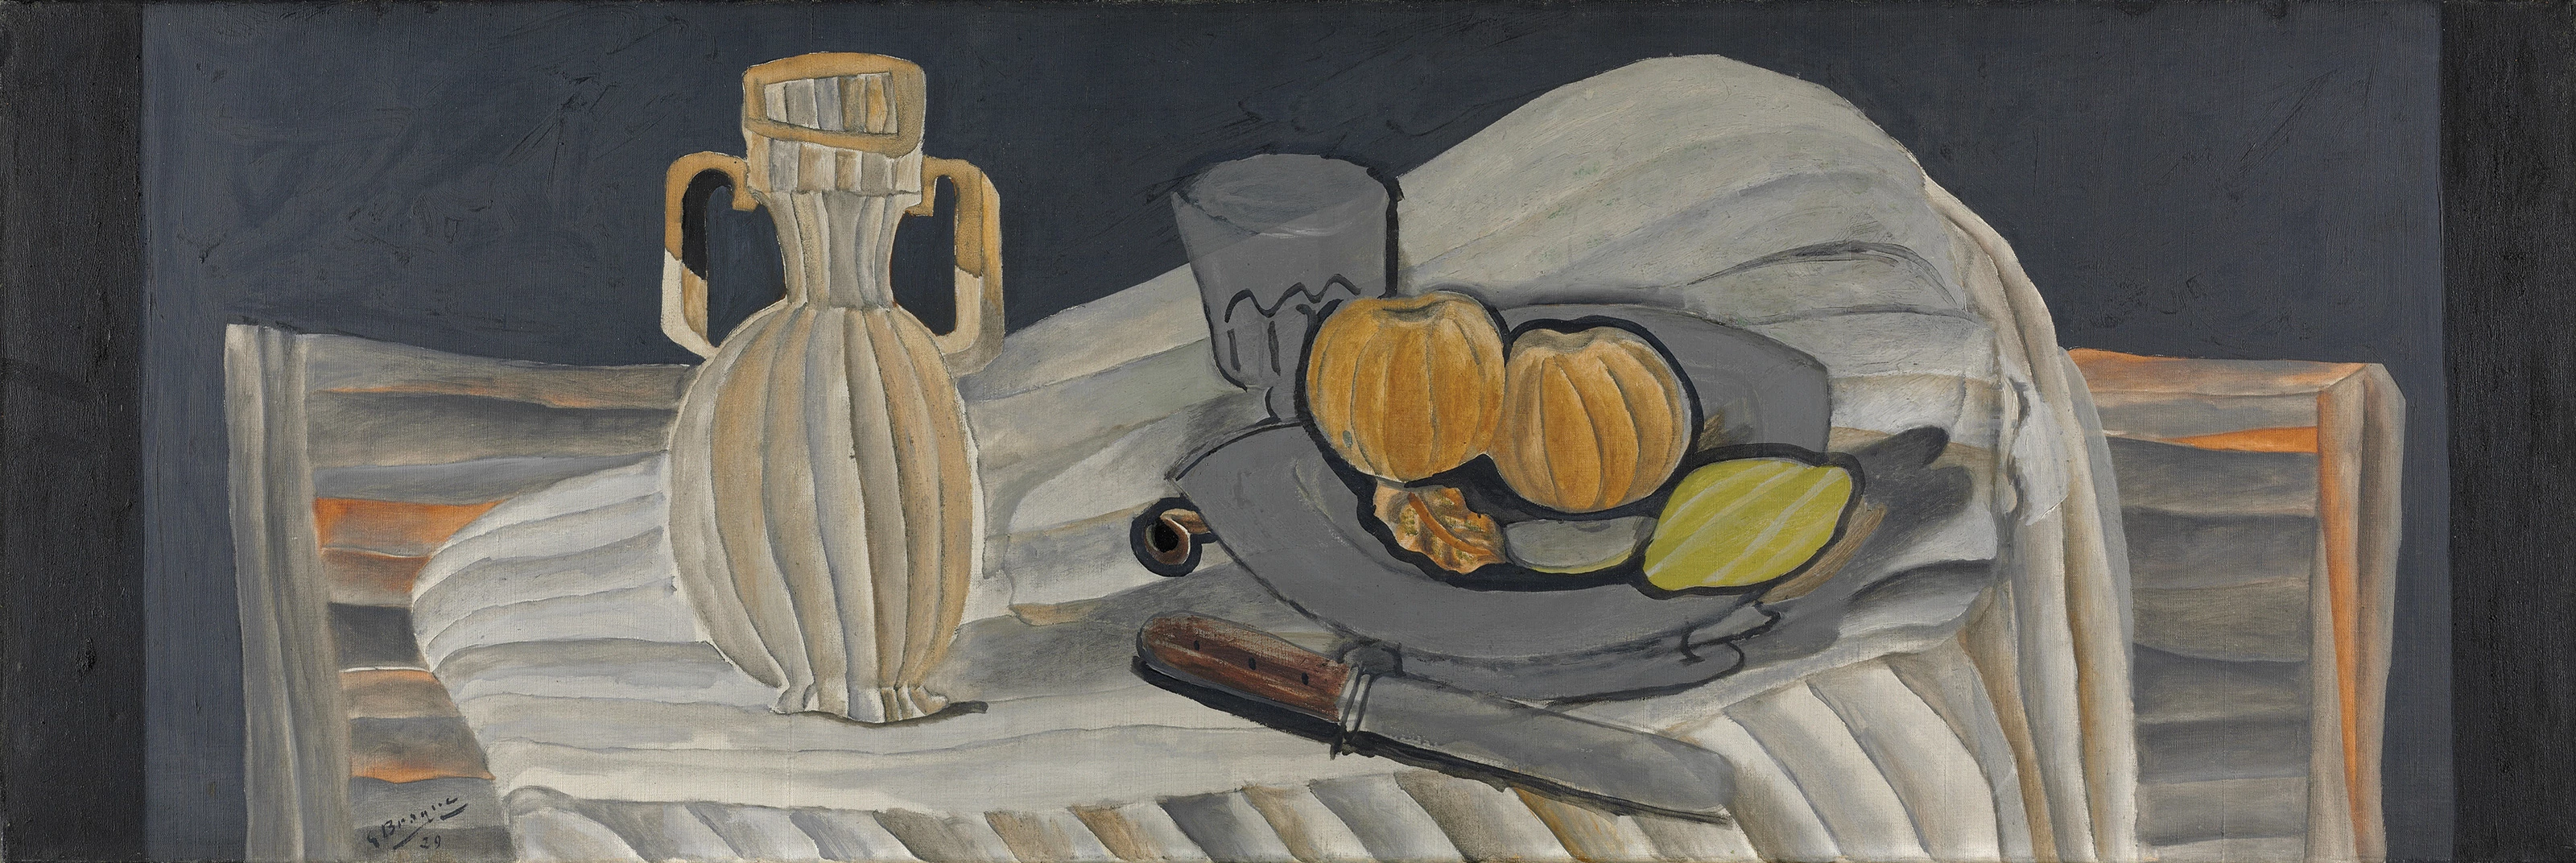 The Crystal Vase, Georges Braque